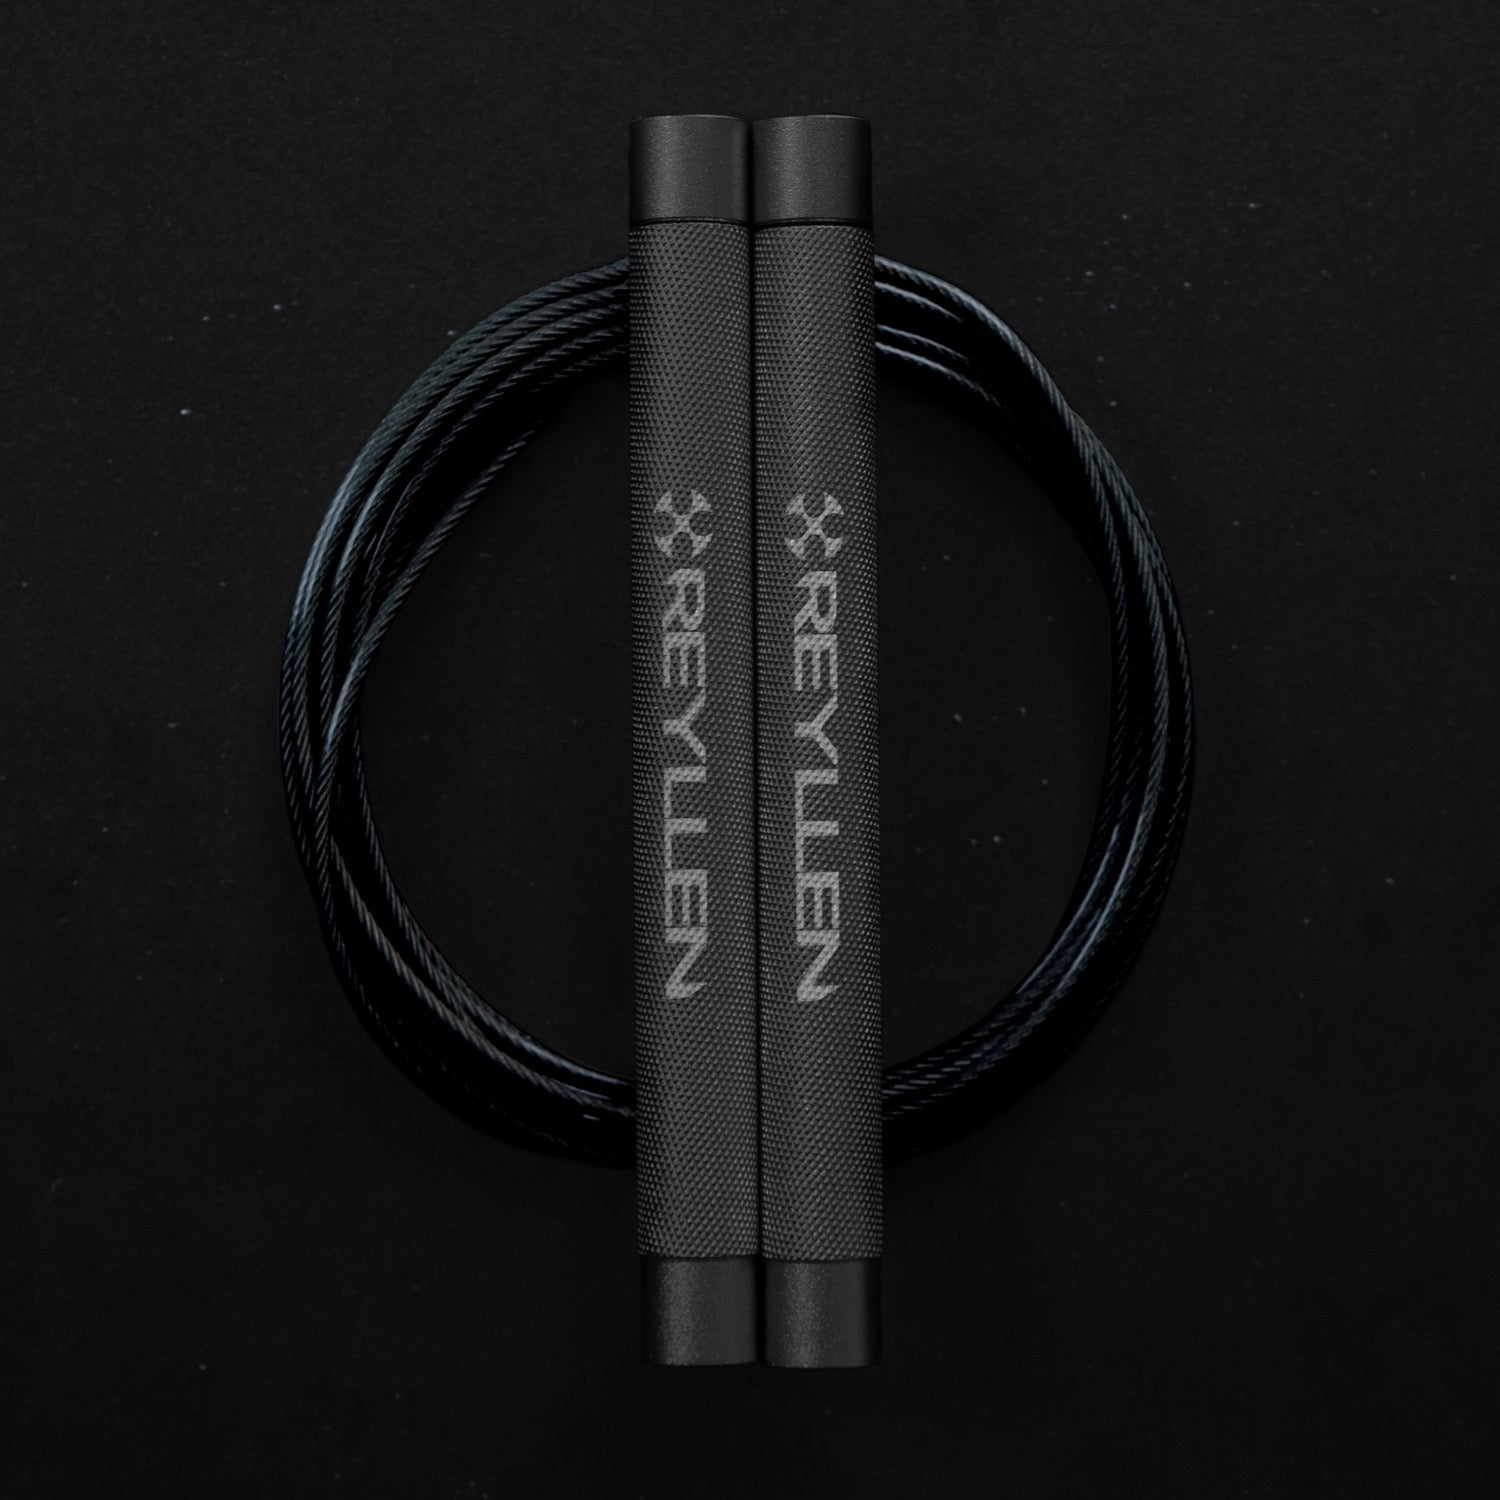 Reyllen Flare Mx Speed Skipping Jump Rope - Aluminium Handles - grey with black pvc cable